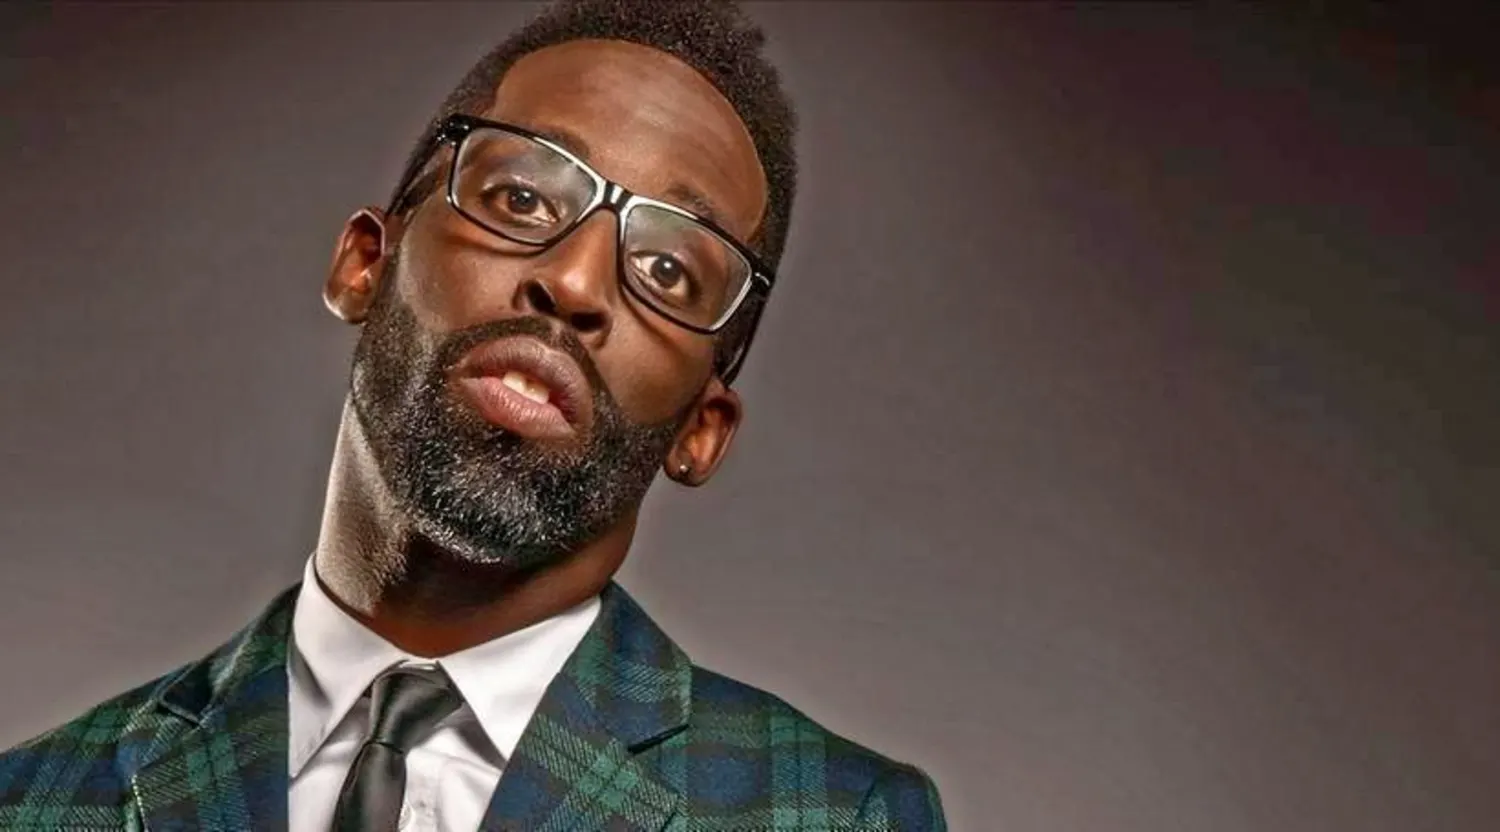 Tye Tribbett Talks About Cheating On His Wife & Forgiveness